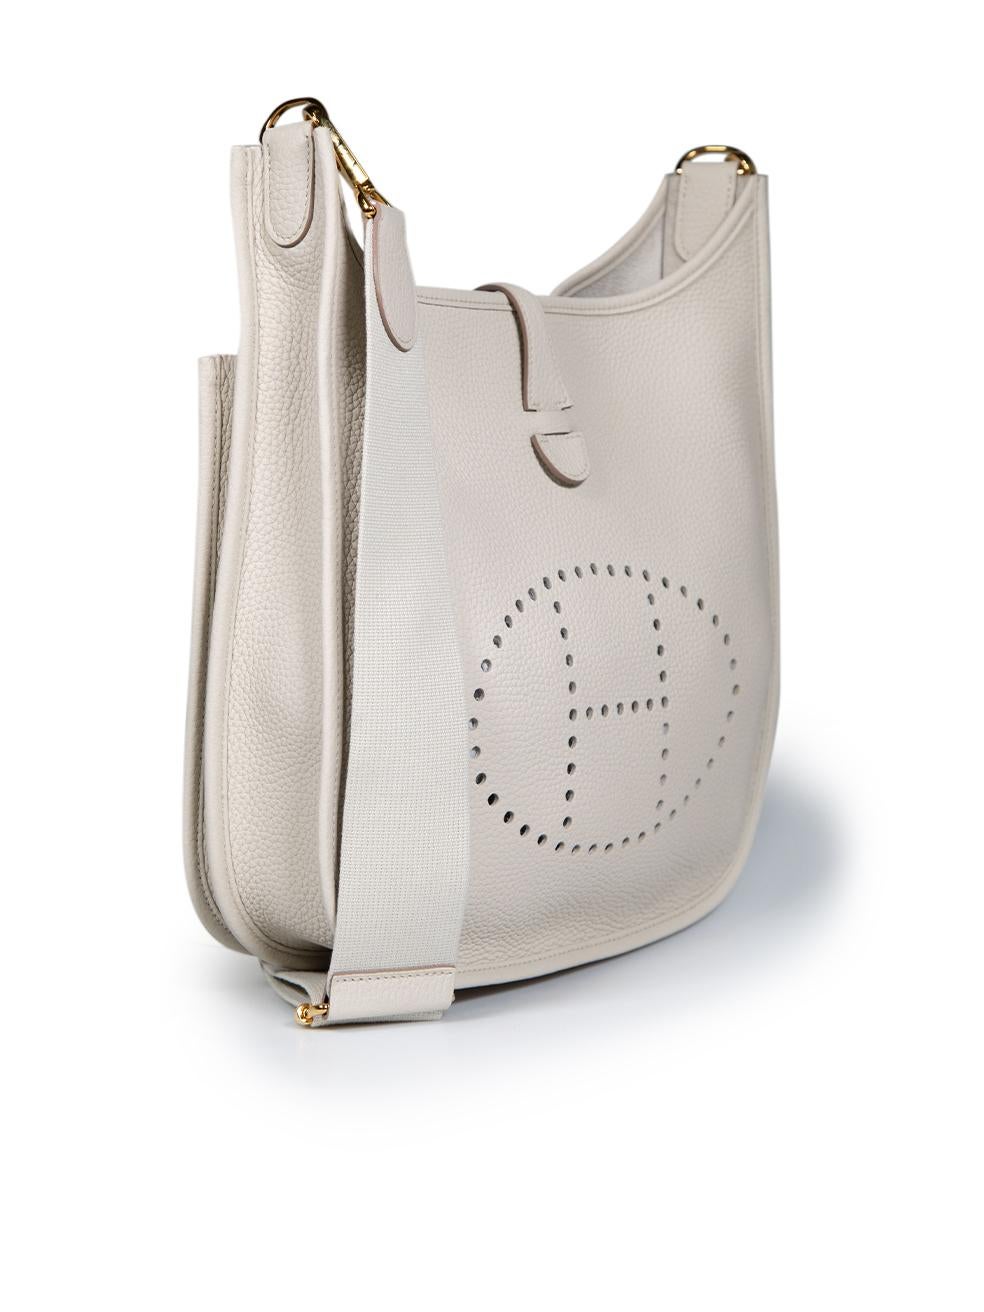 CONDITION is Never worn. No visible wear to the bag is evident on this new Hermès designer resale item. This item comes with the original dust bag and box.
 
 
 
 Details
 
 
 Datecode - B Stamp - (2023)
 
 Model: Evelyne III 29
 
 White
 
 Clemence